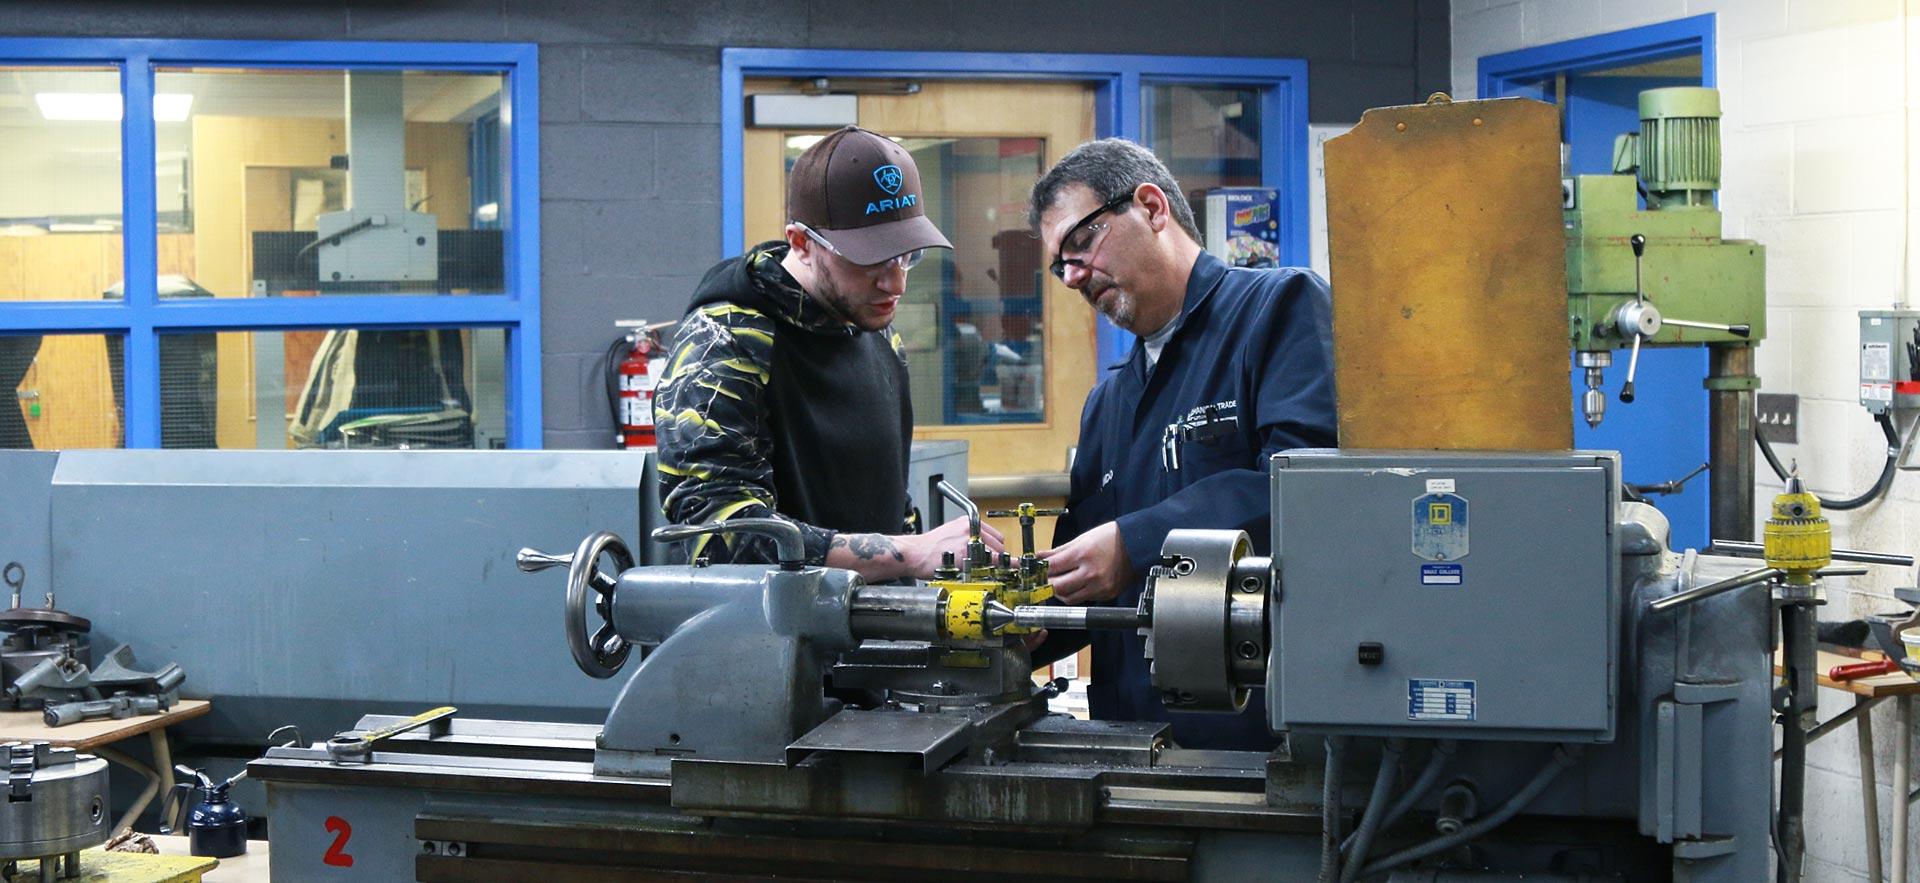 One male machine shop student working on a class project with the help of his instructor.